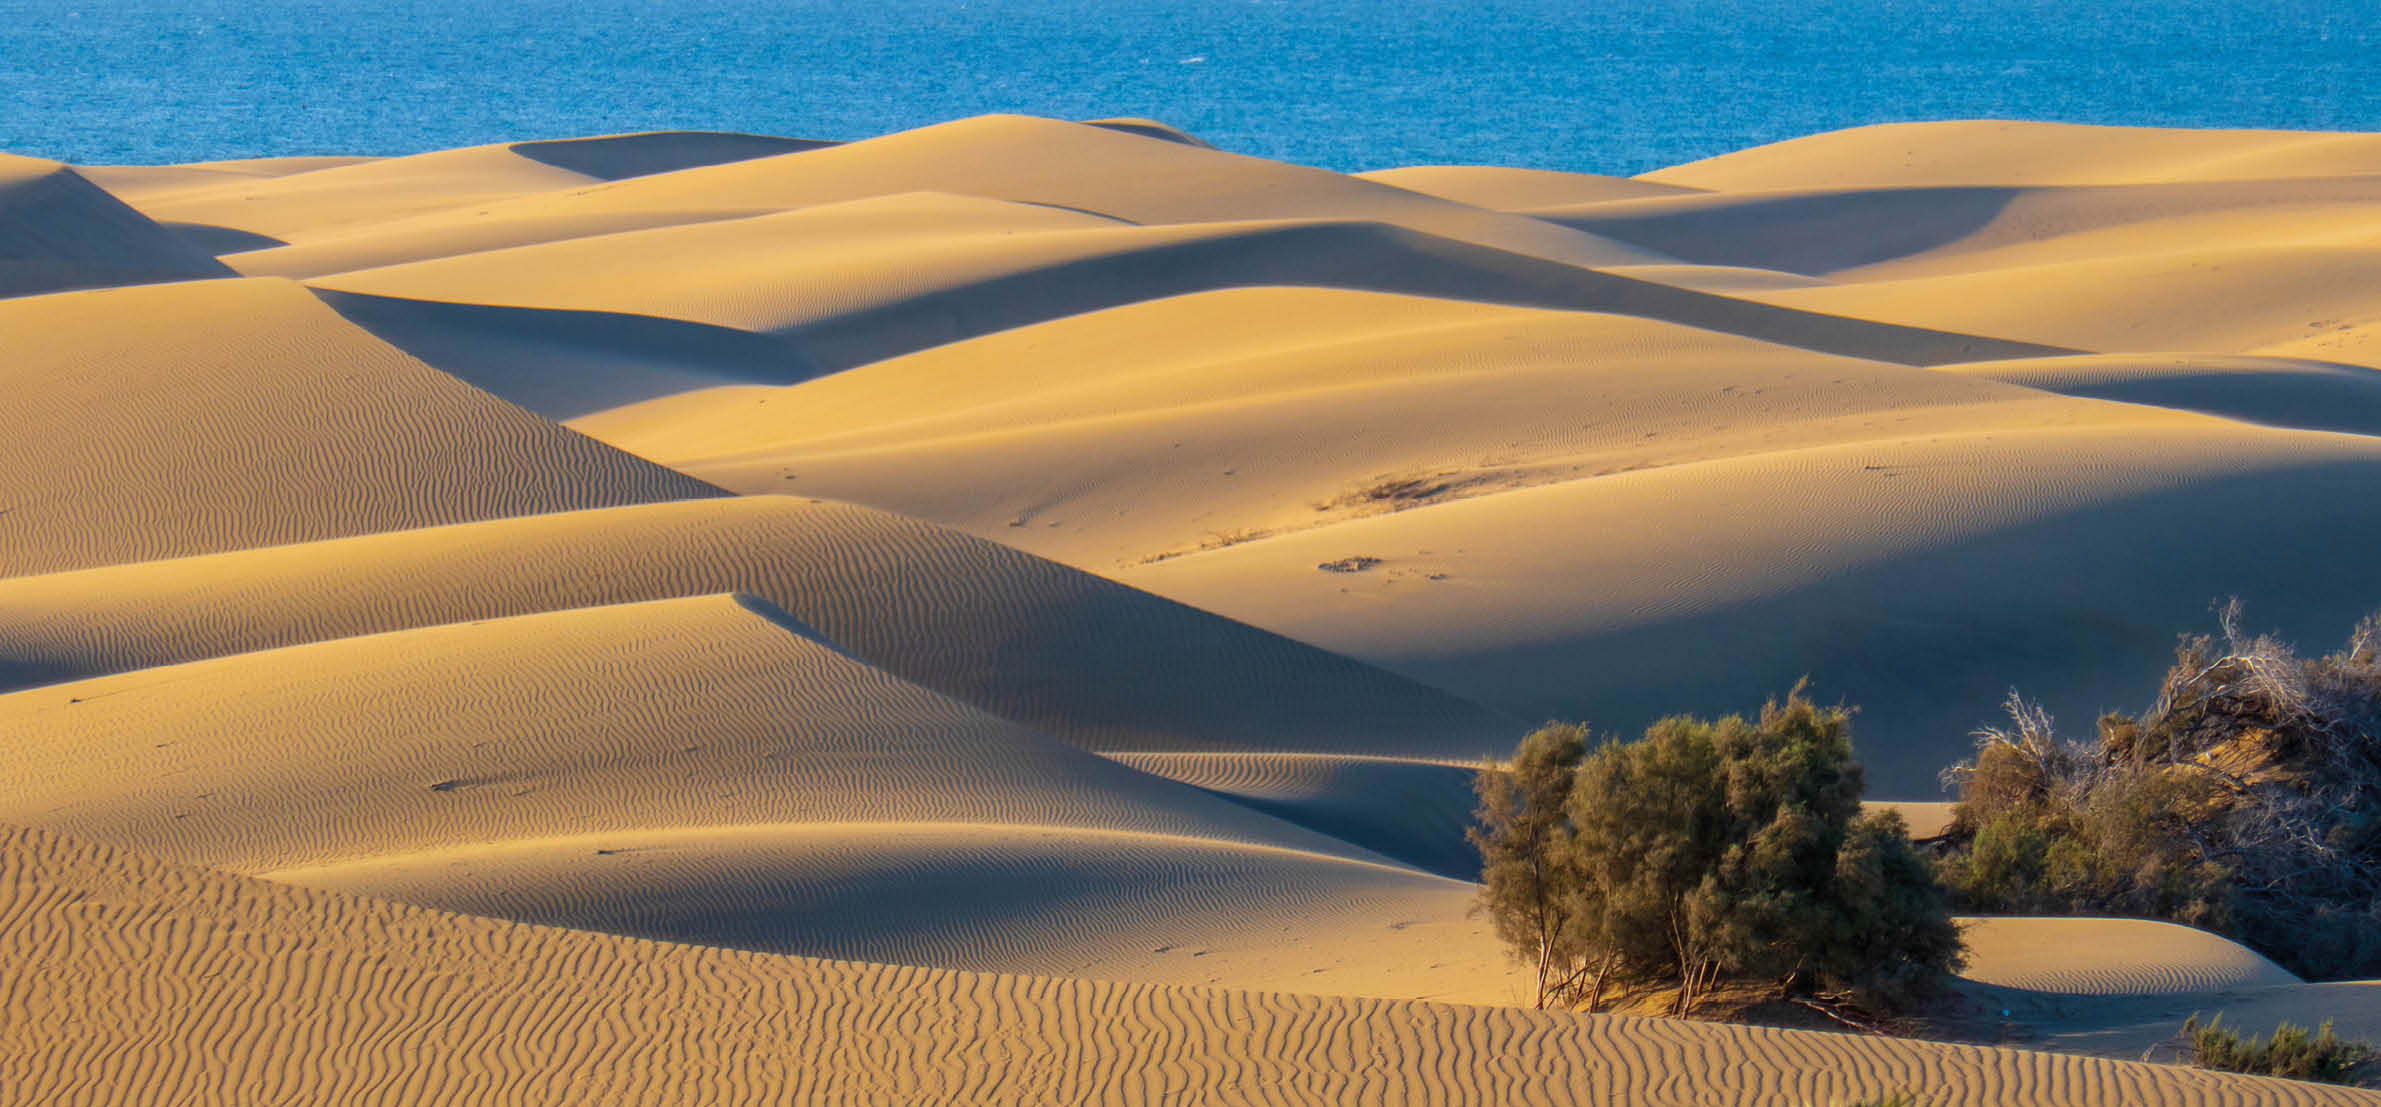 The famous Dunes of Maspalomas, Gran Canaria in summer